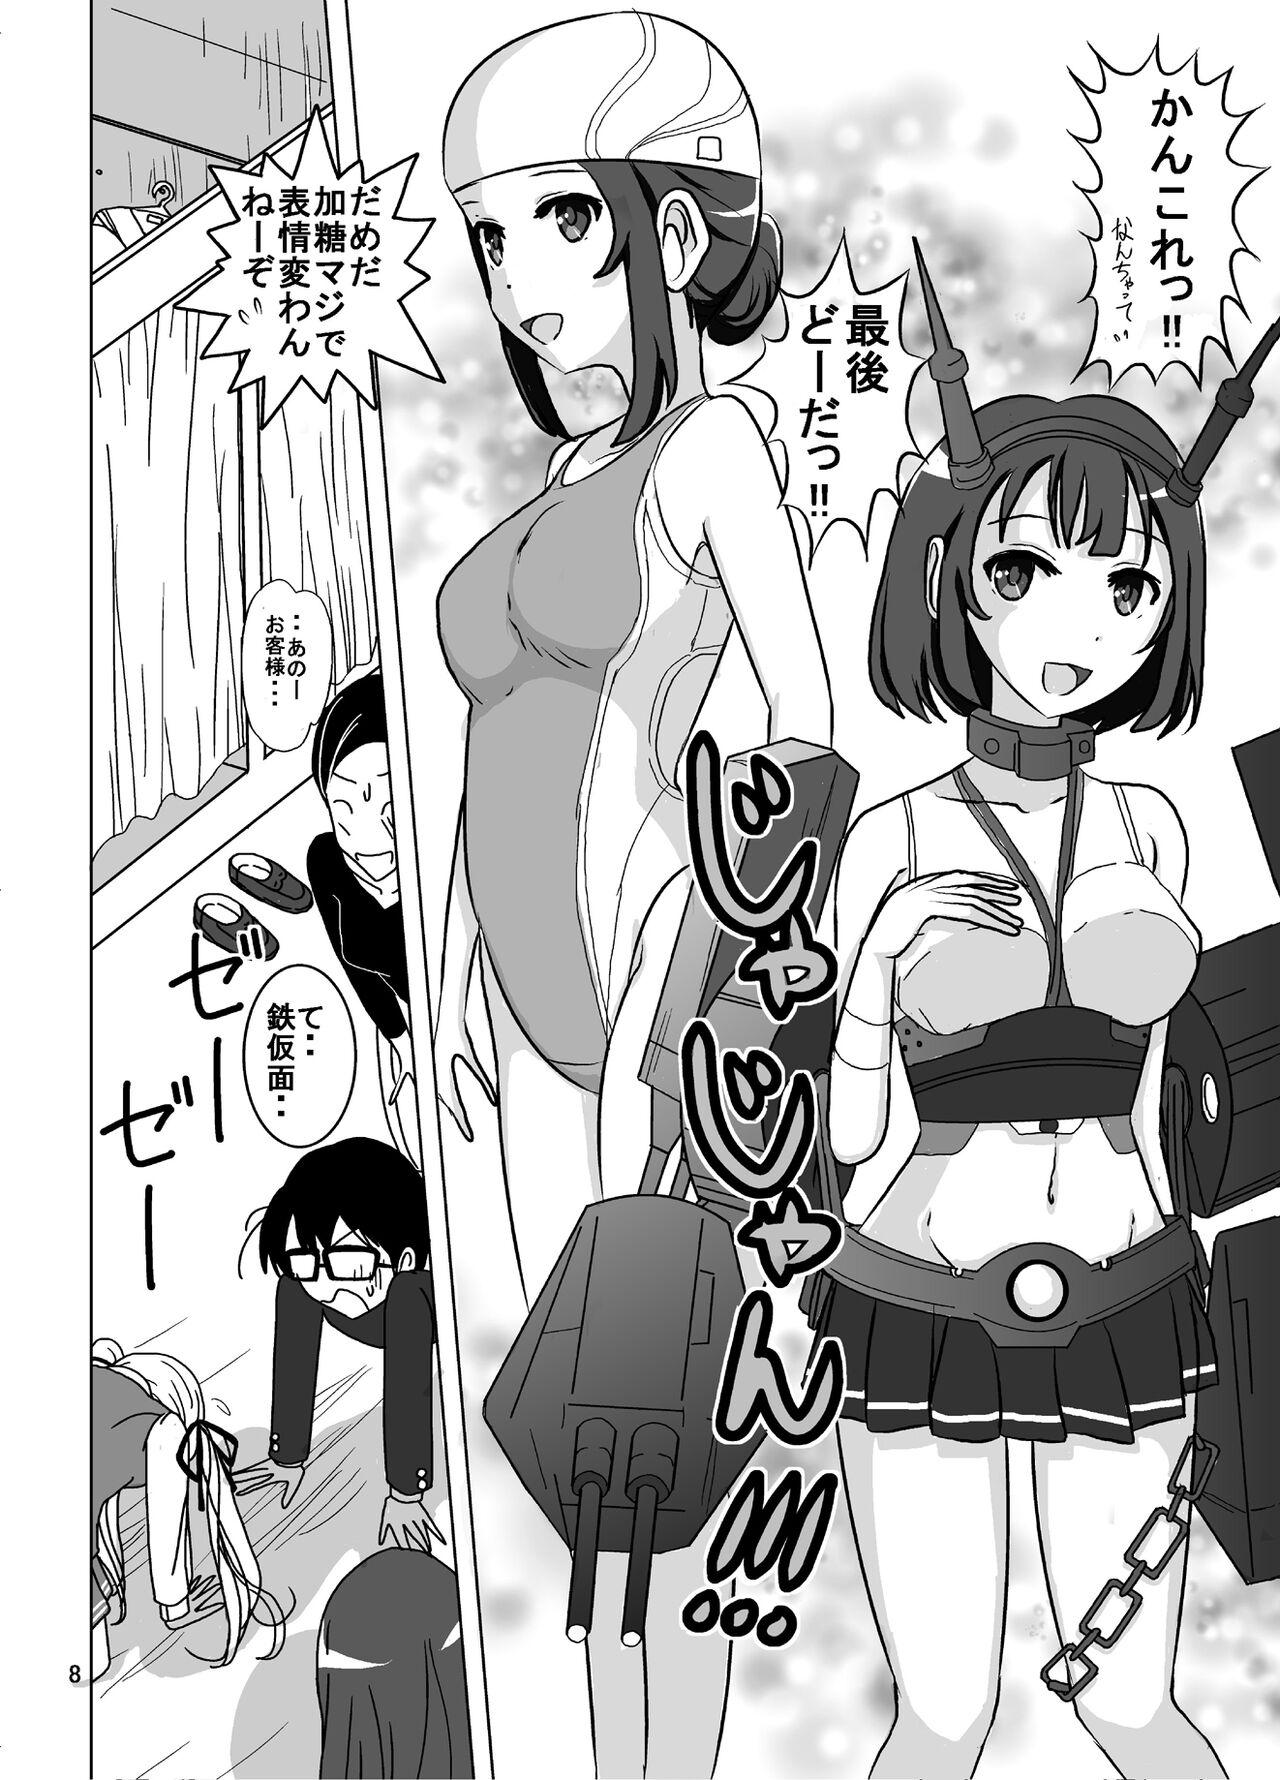 Chick How To Make A Public Spectacle LOL - Saenai heroine no sodatekata Mujer - Page 8